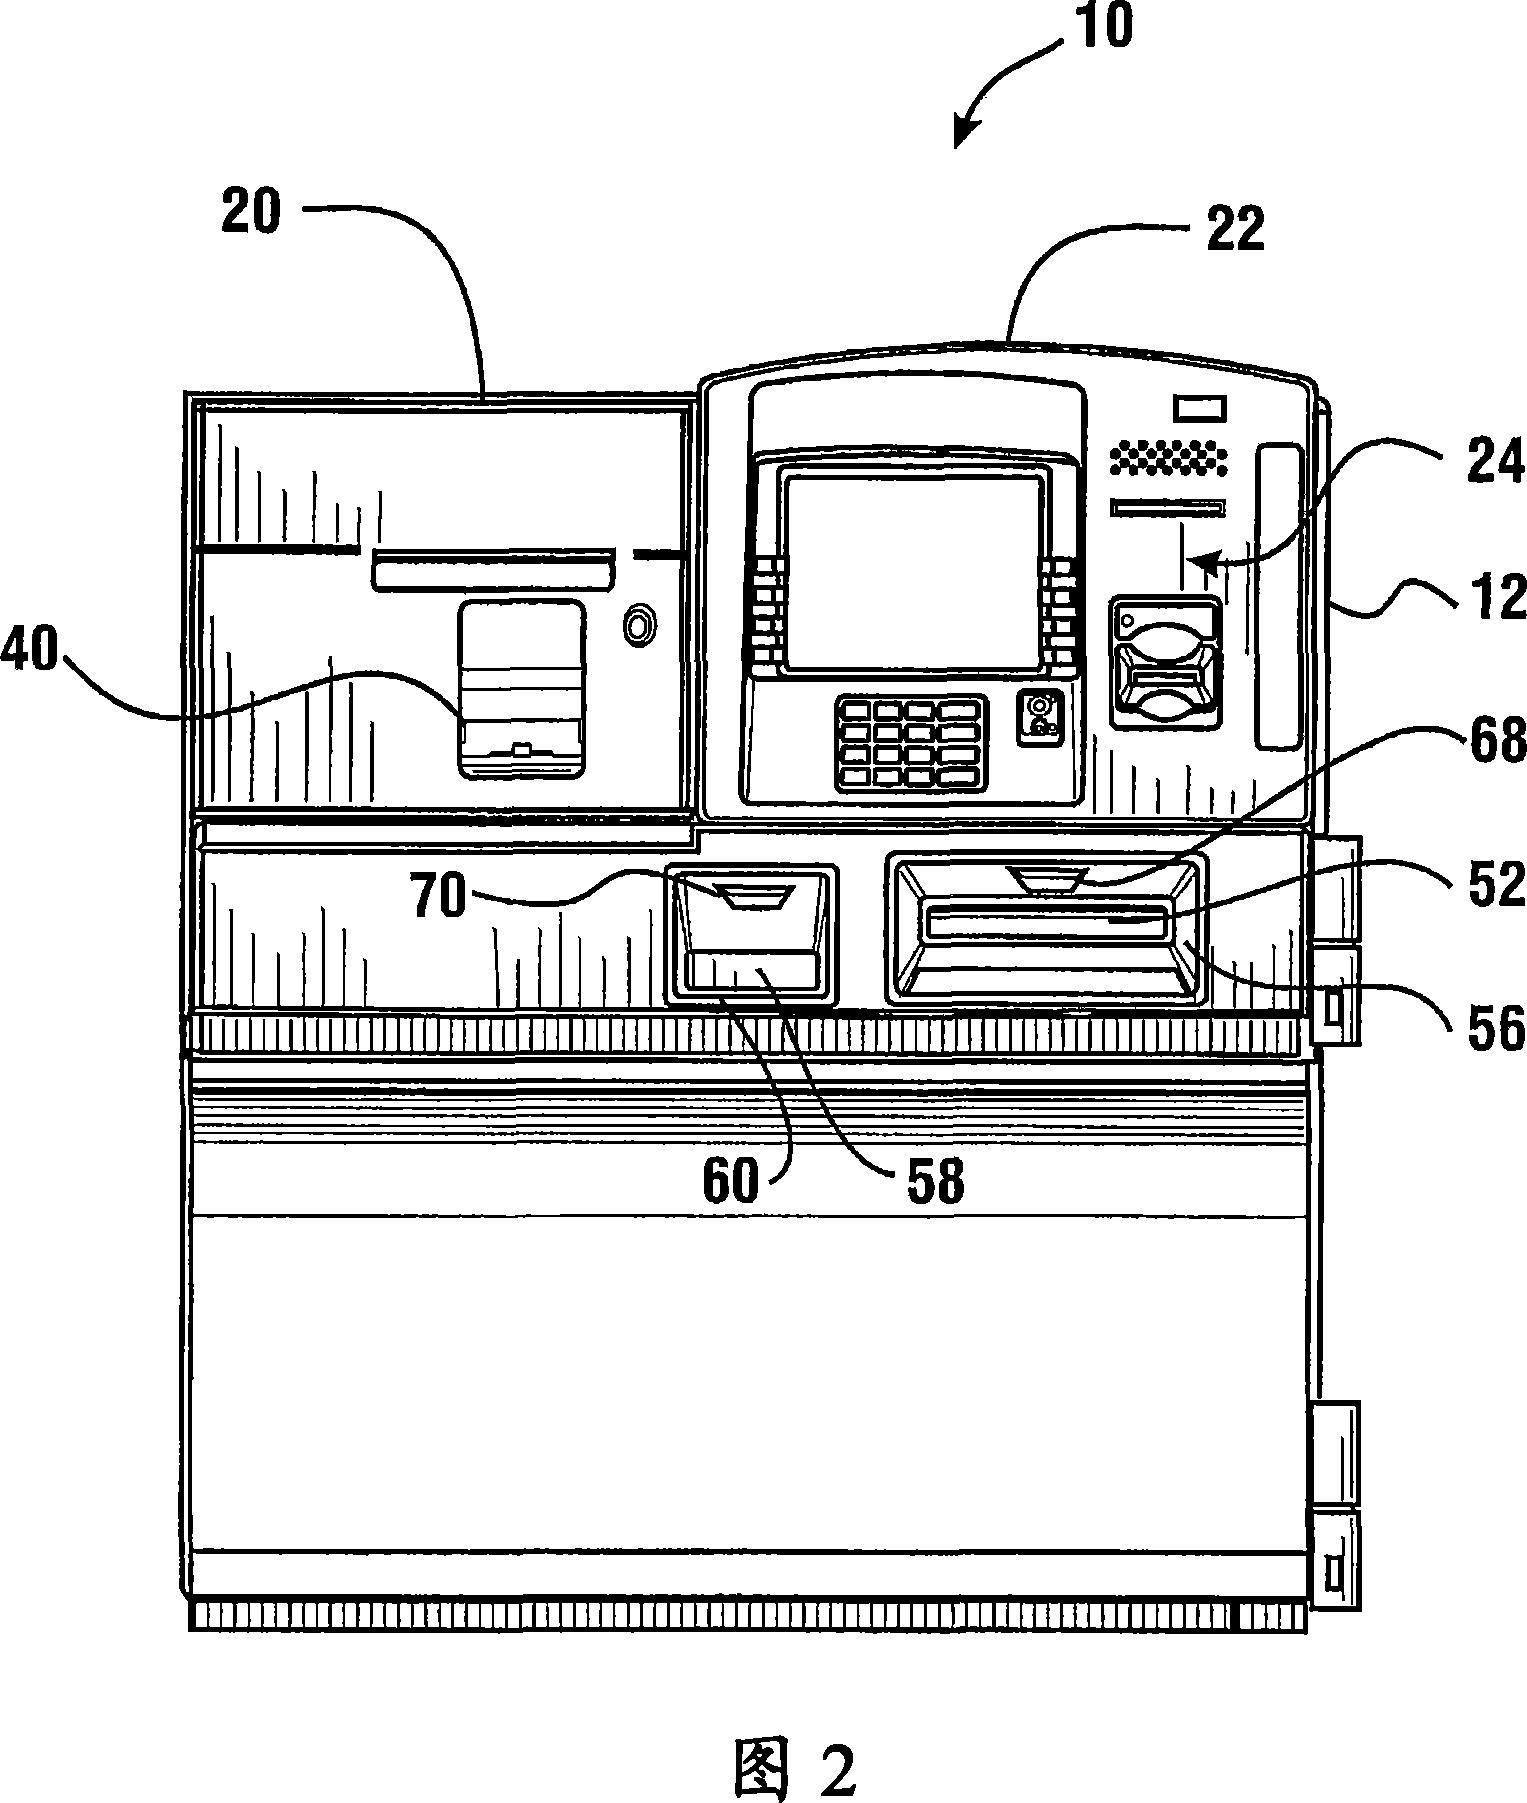 Cash dispensing automated banking machine diagostic system and method